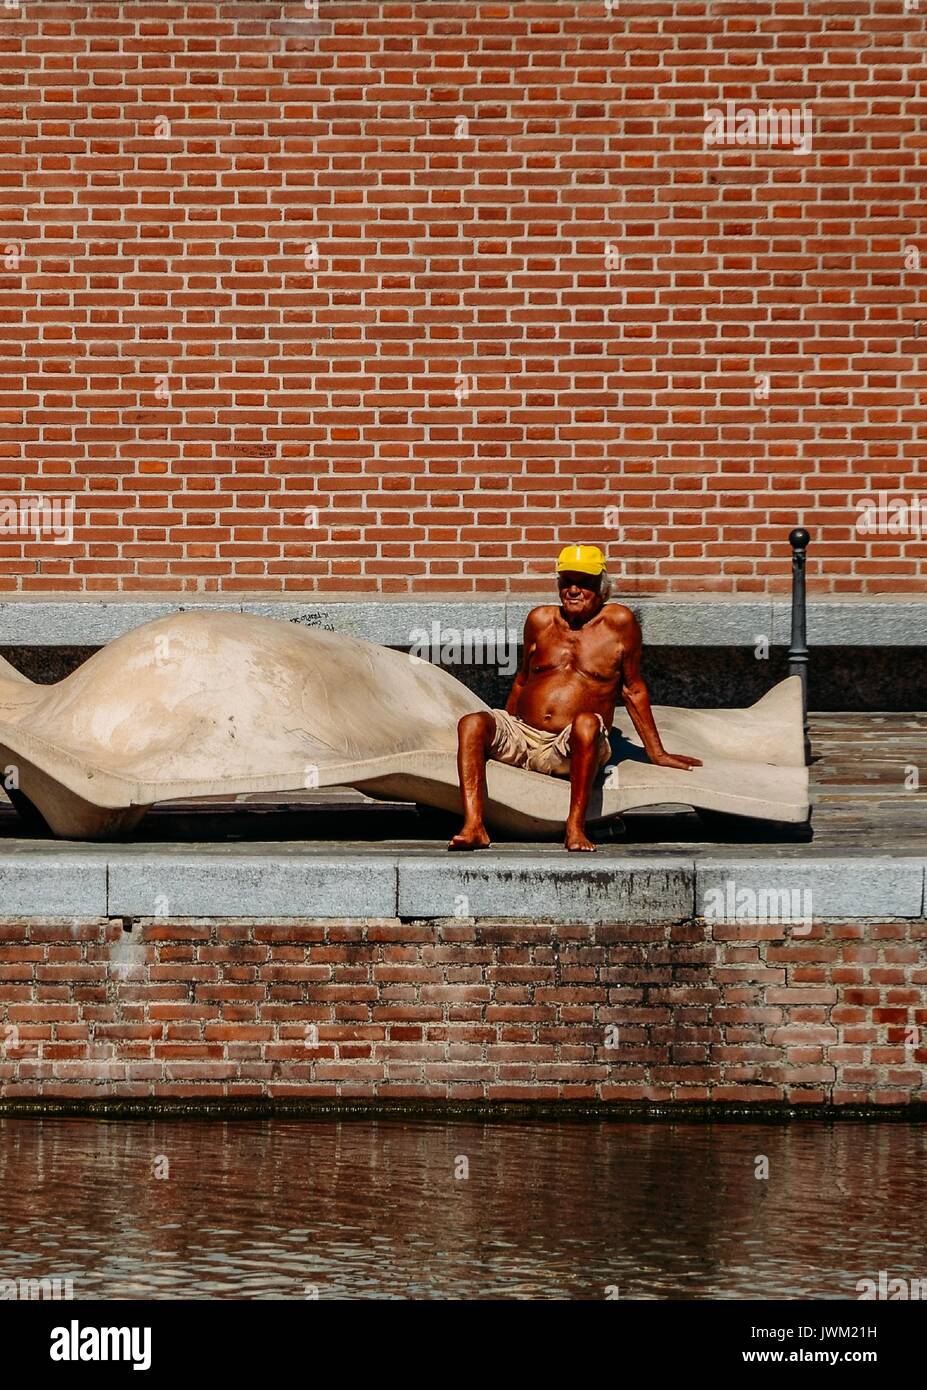 Man (60-65) tanning outside at water's edge in Milan, Italy during the height of the summer Stock Photo